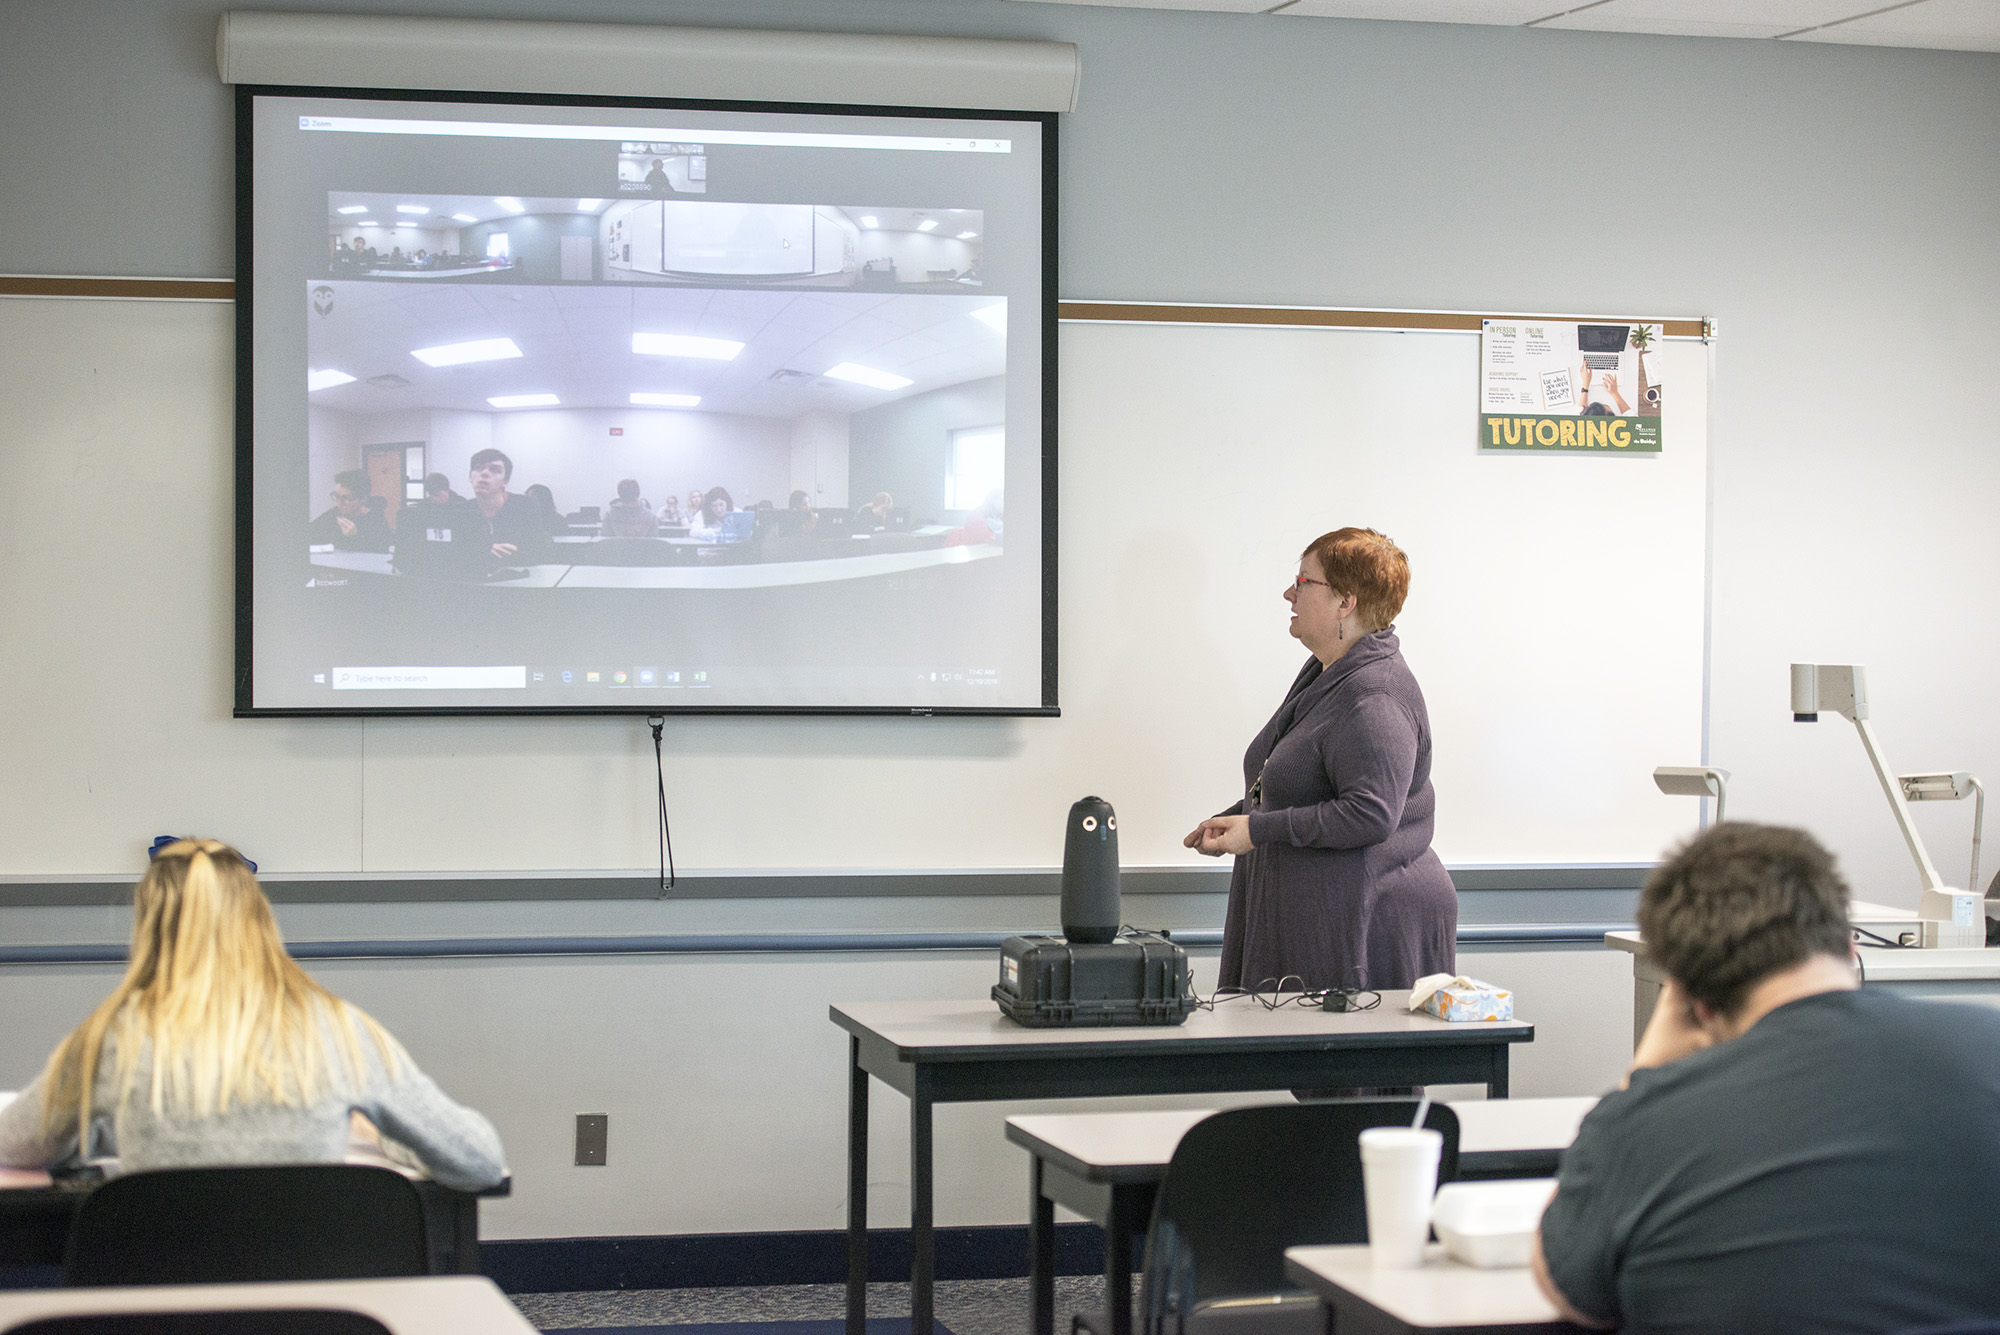 History professor Michelle Wright teaches a class on campus in Battle Creek while teaching students in Albion remotely via a video feed.